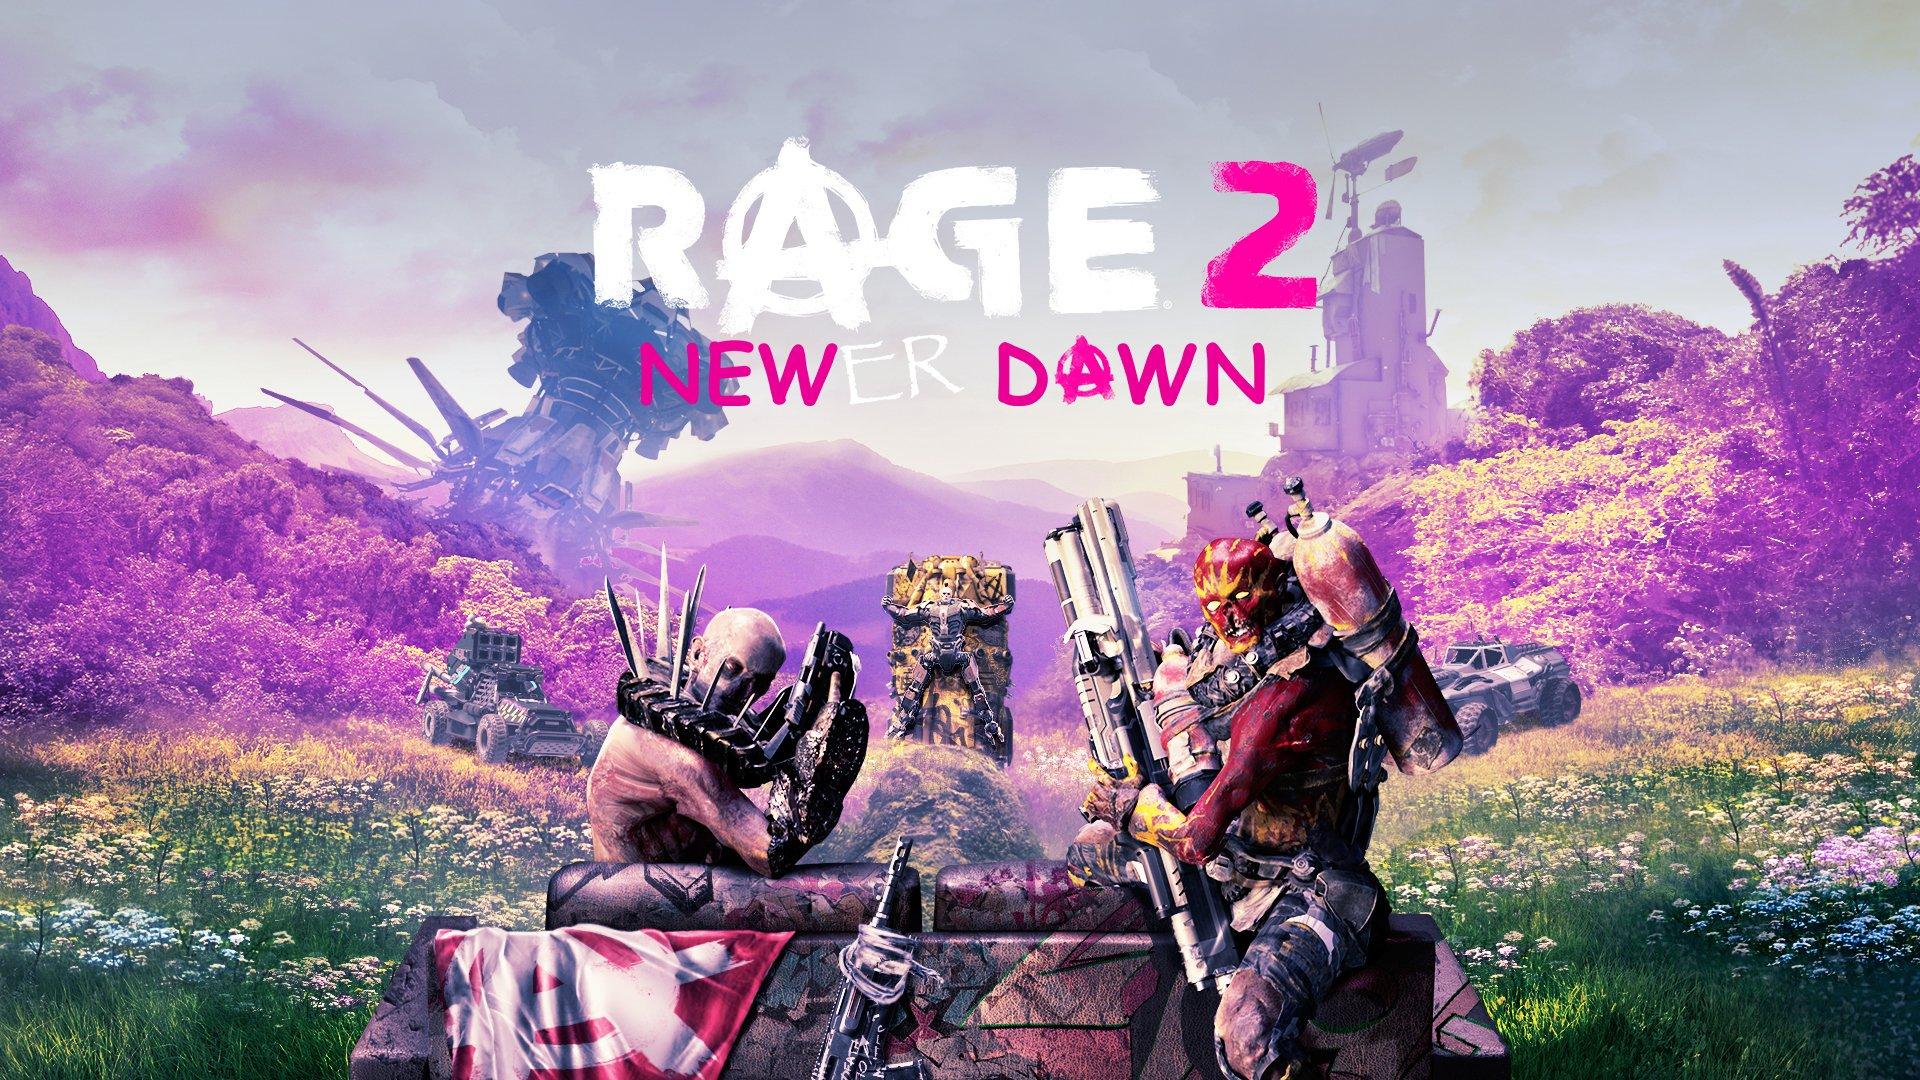 RAGE 2, I guess pink is all the RAGE? Get pumped